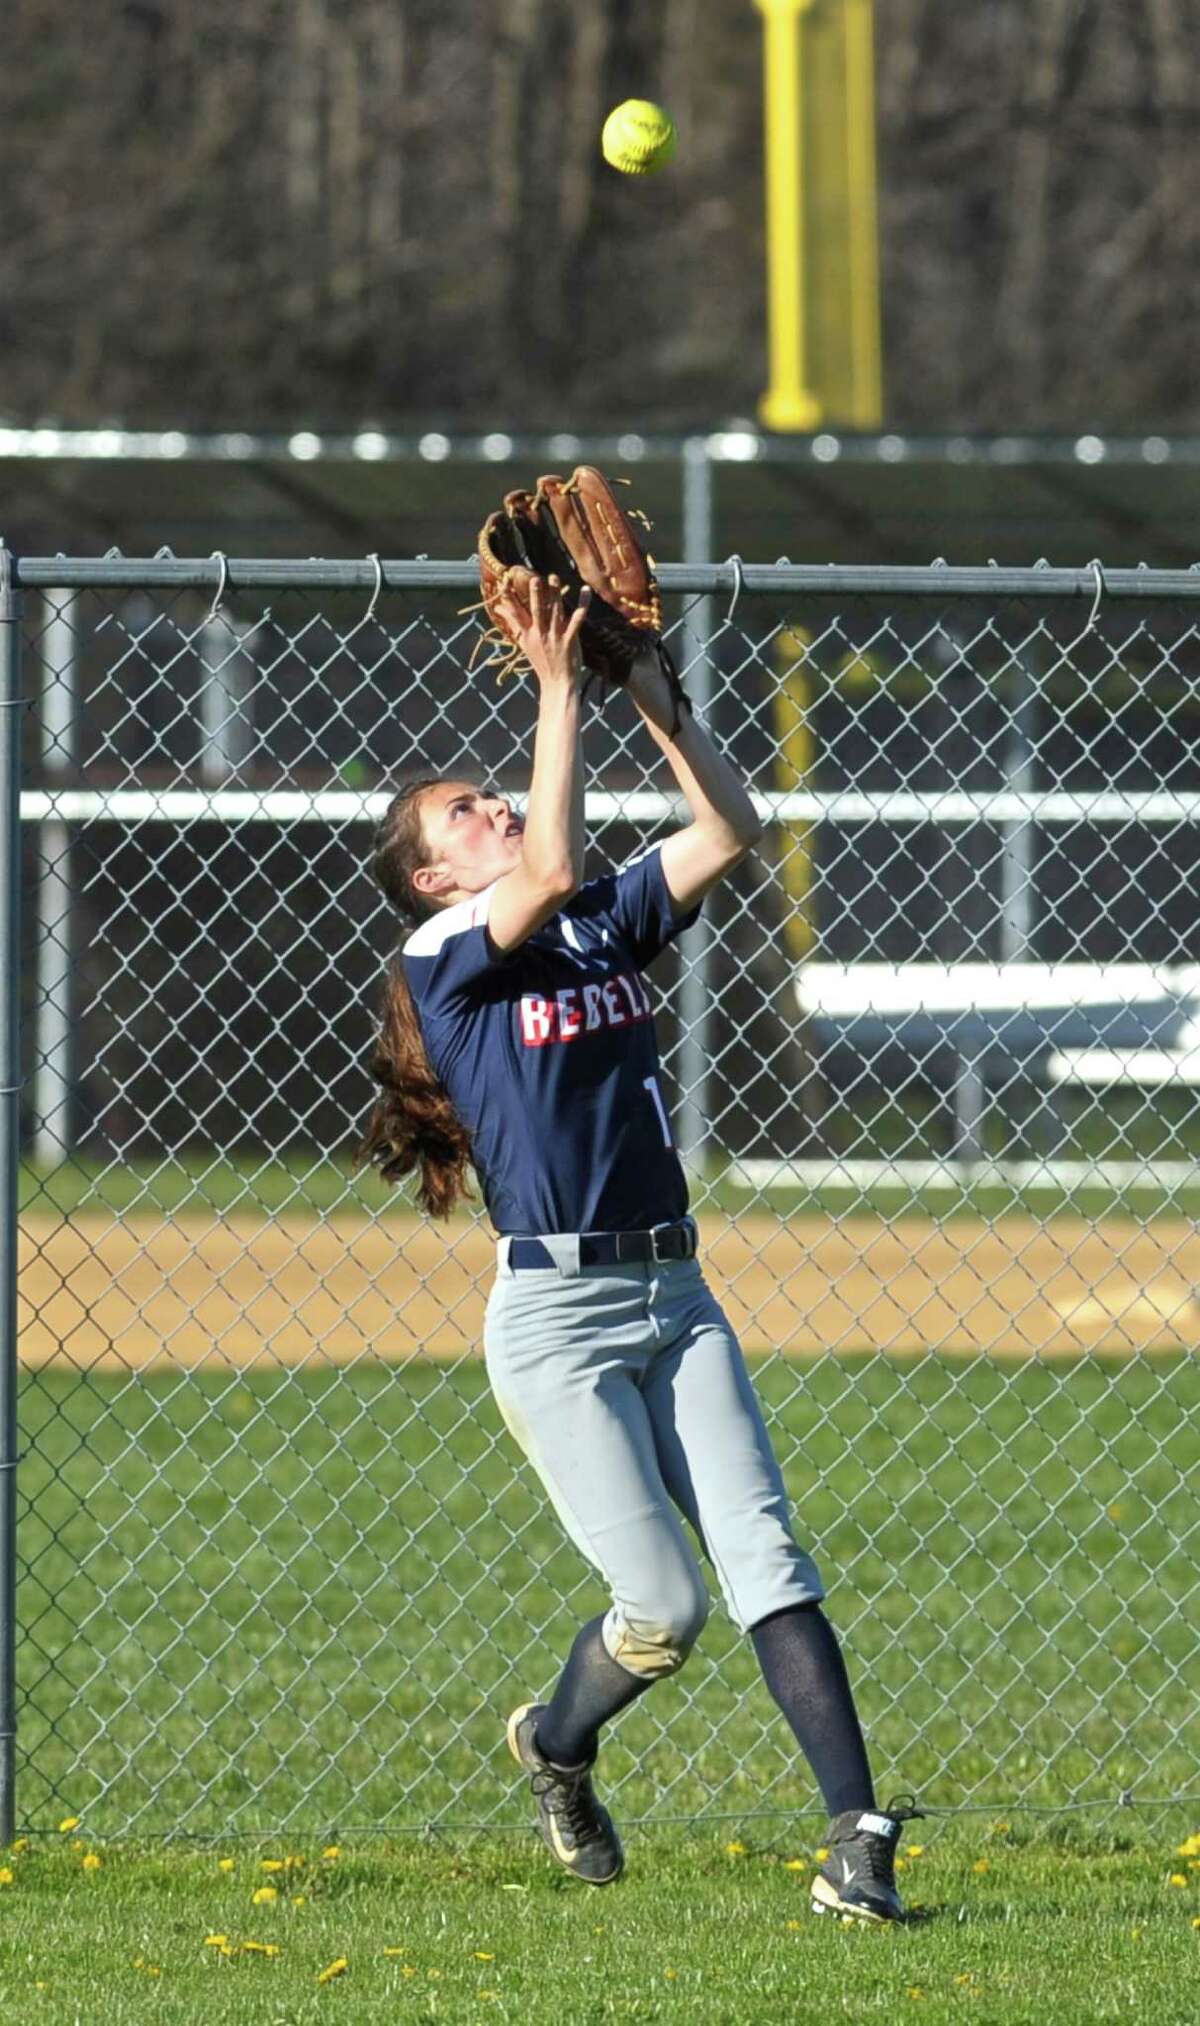 New Fairfield's Rachel Mirel (1) makes a catch at the center field fence for the out in the SWC softball game between Masuk and New Fairfield high schools on Wednesday afternoon, April 20, 2016, at New Fairfield High School, New Fairfield, Conn.